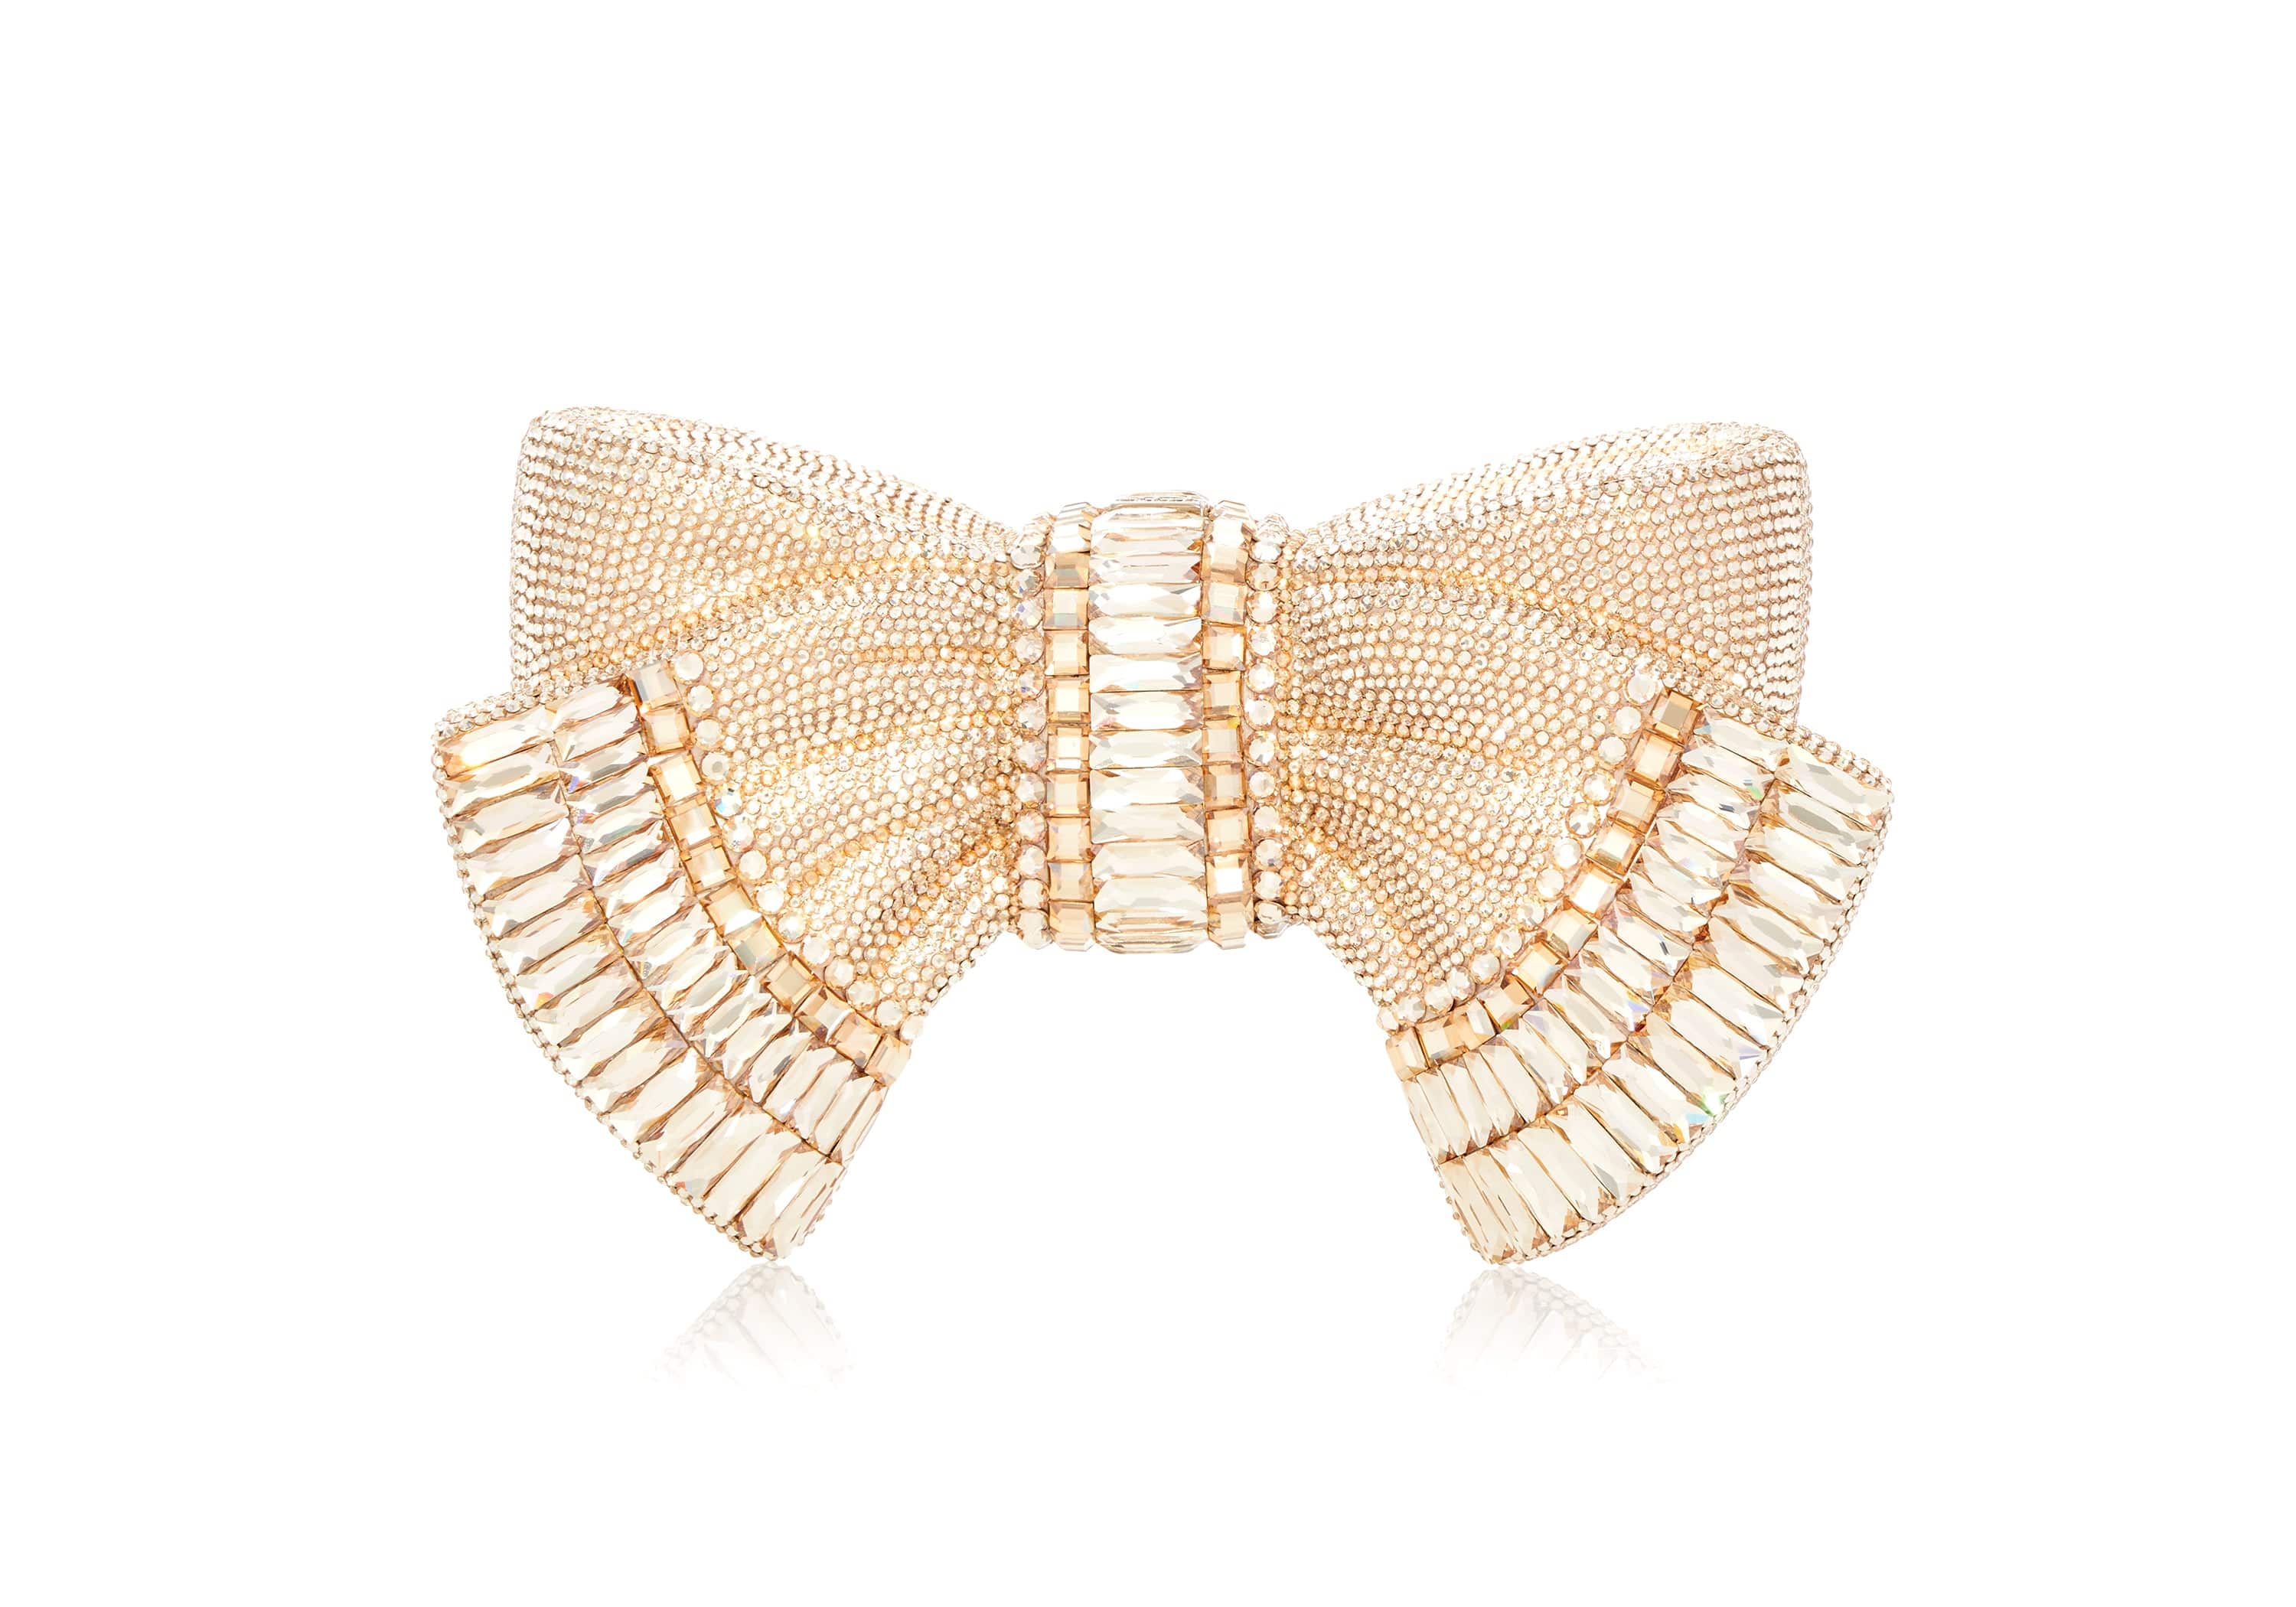 Judith Leiber Couture Bow Crystal Clutch